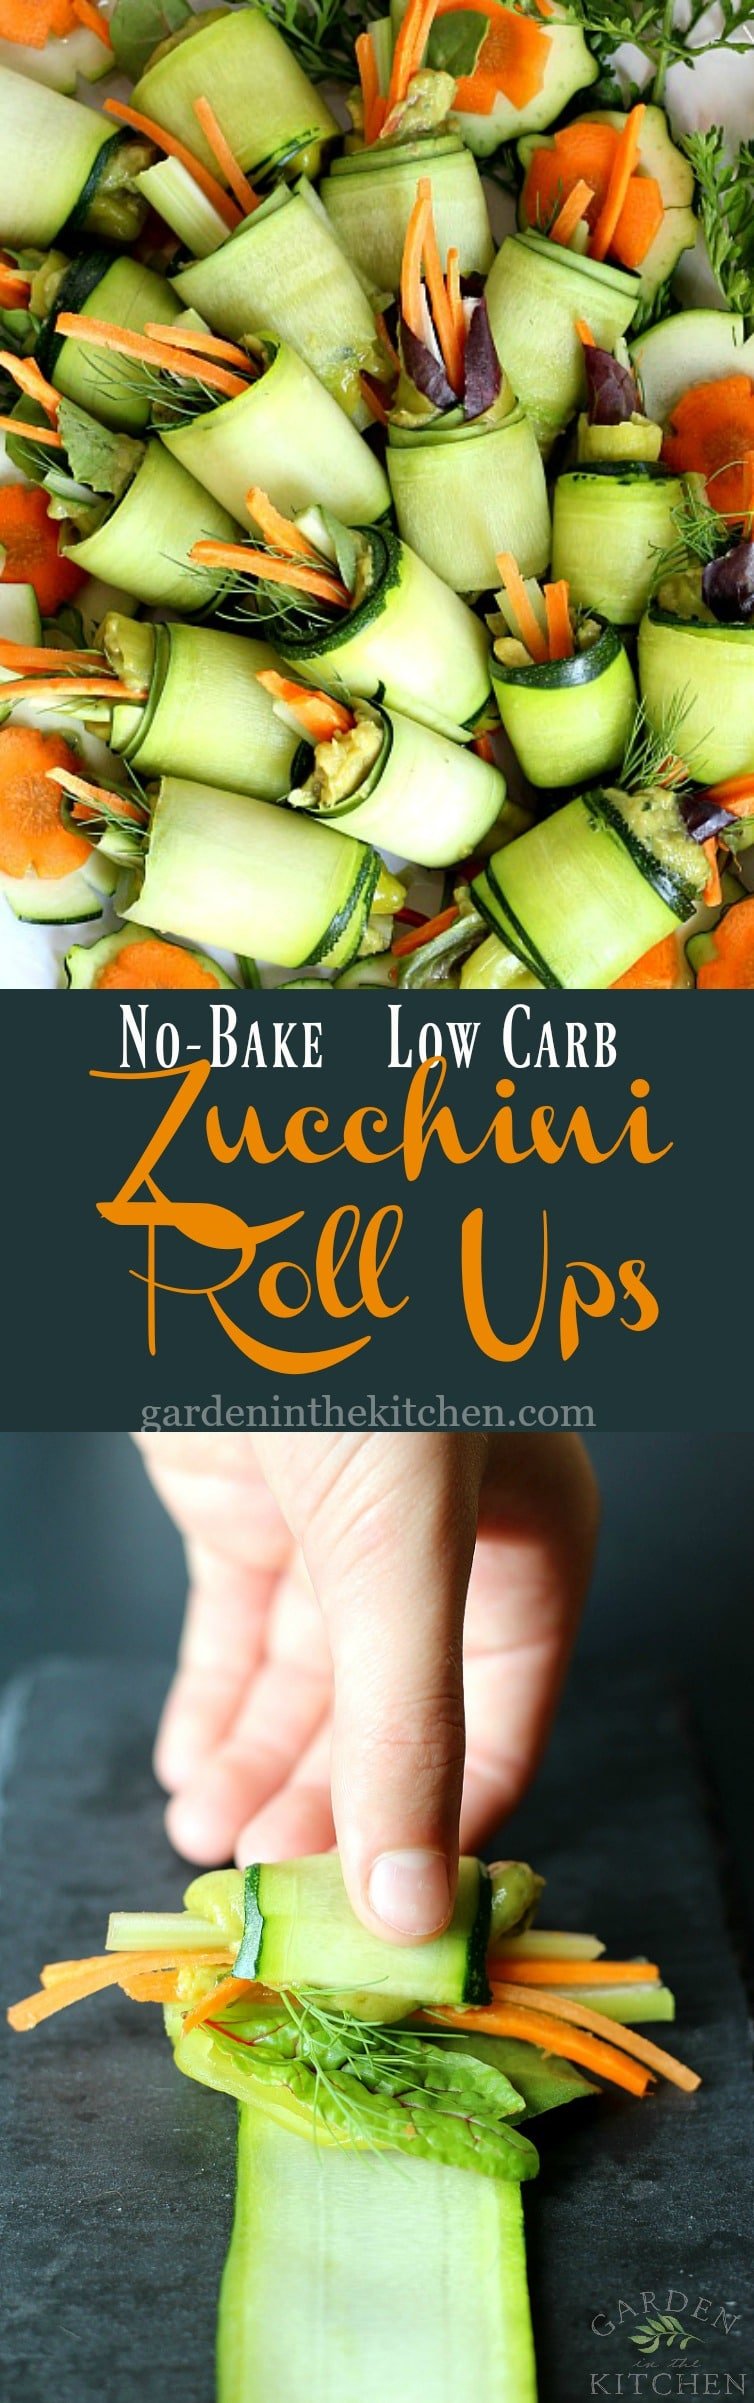 No-Bake Low Carb Zucchini Roll Ups | Garden in the Kitchen